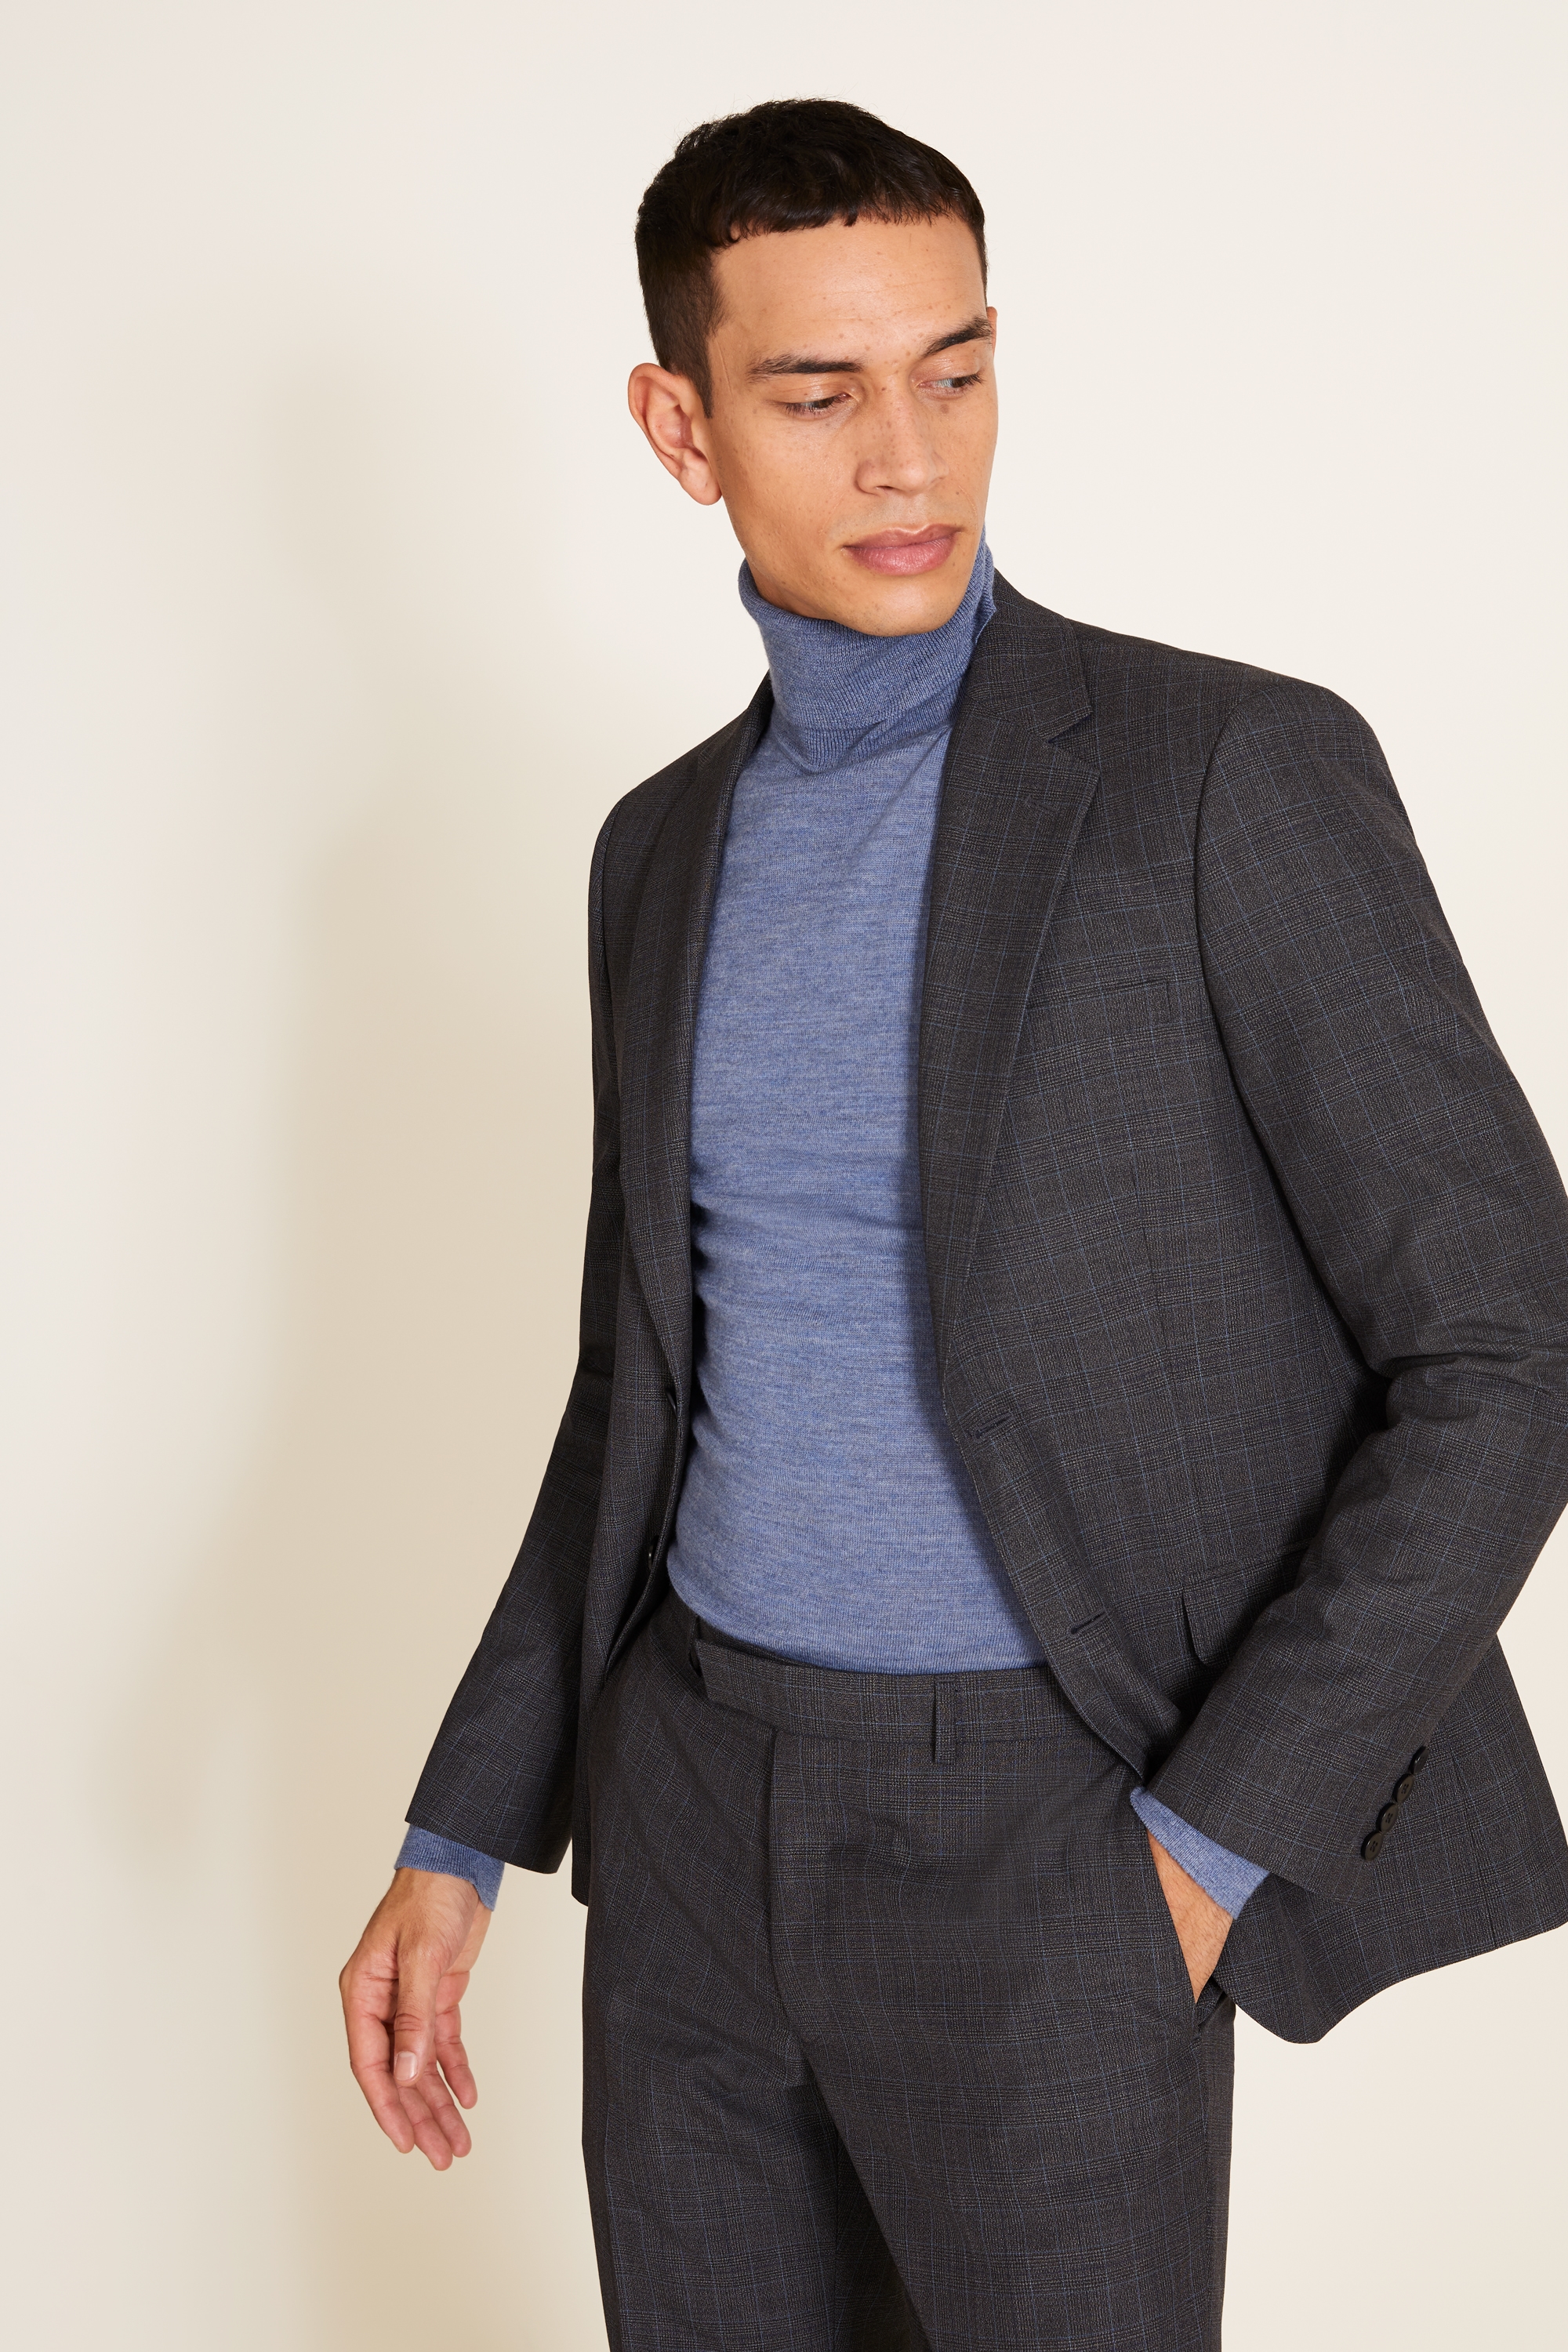 Slim Fit Charcoal & Sky Check Jacket | Buy Online at Moss